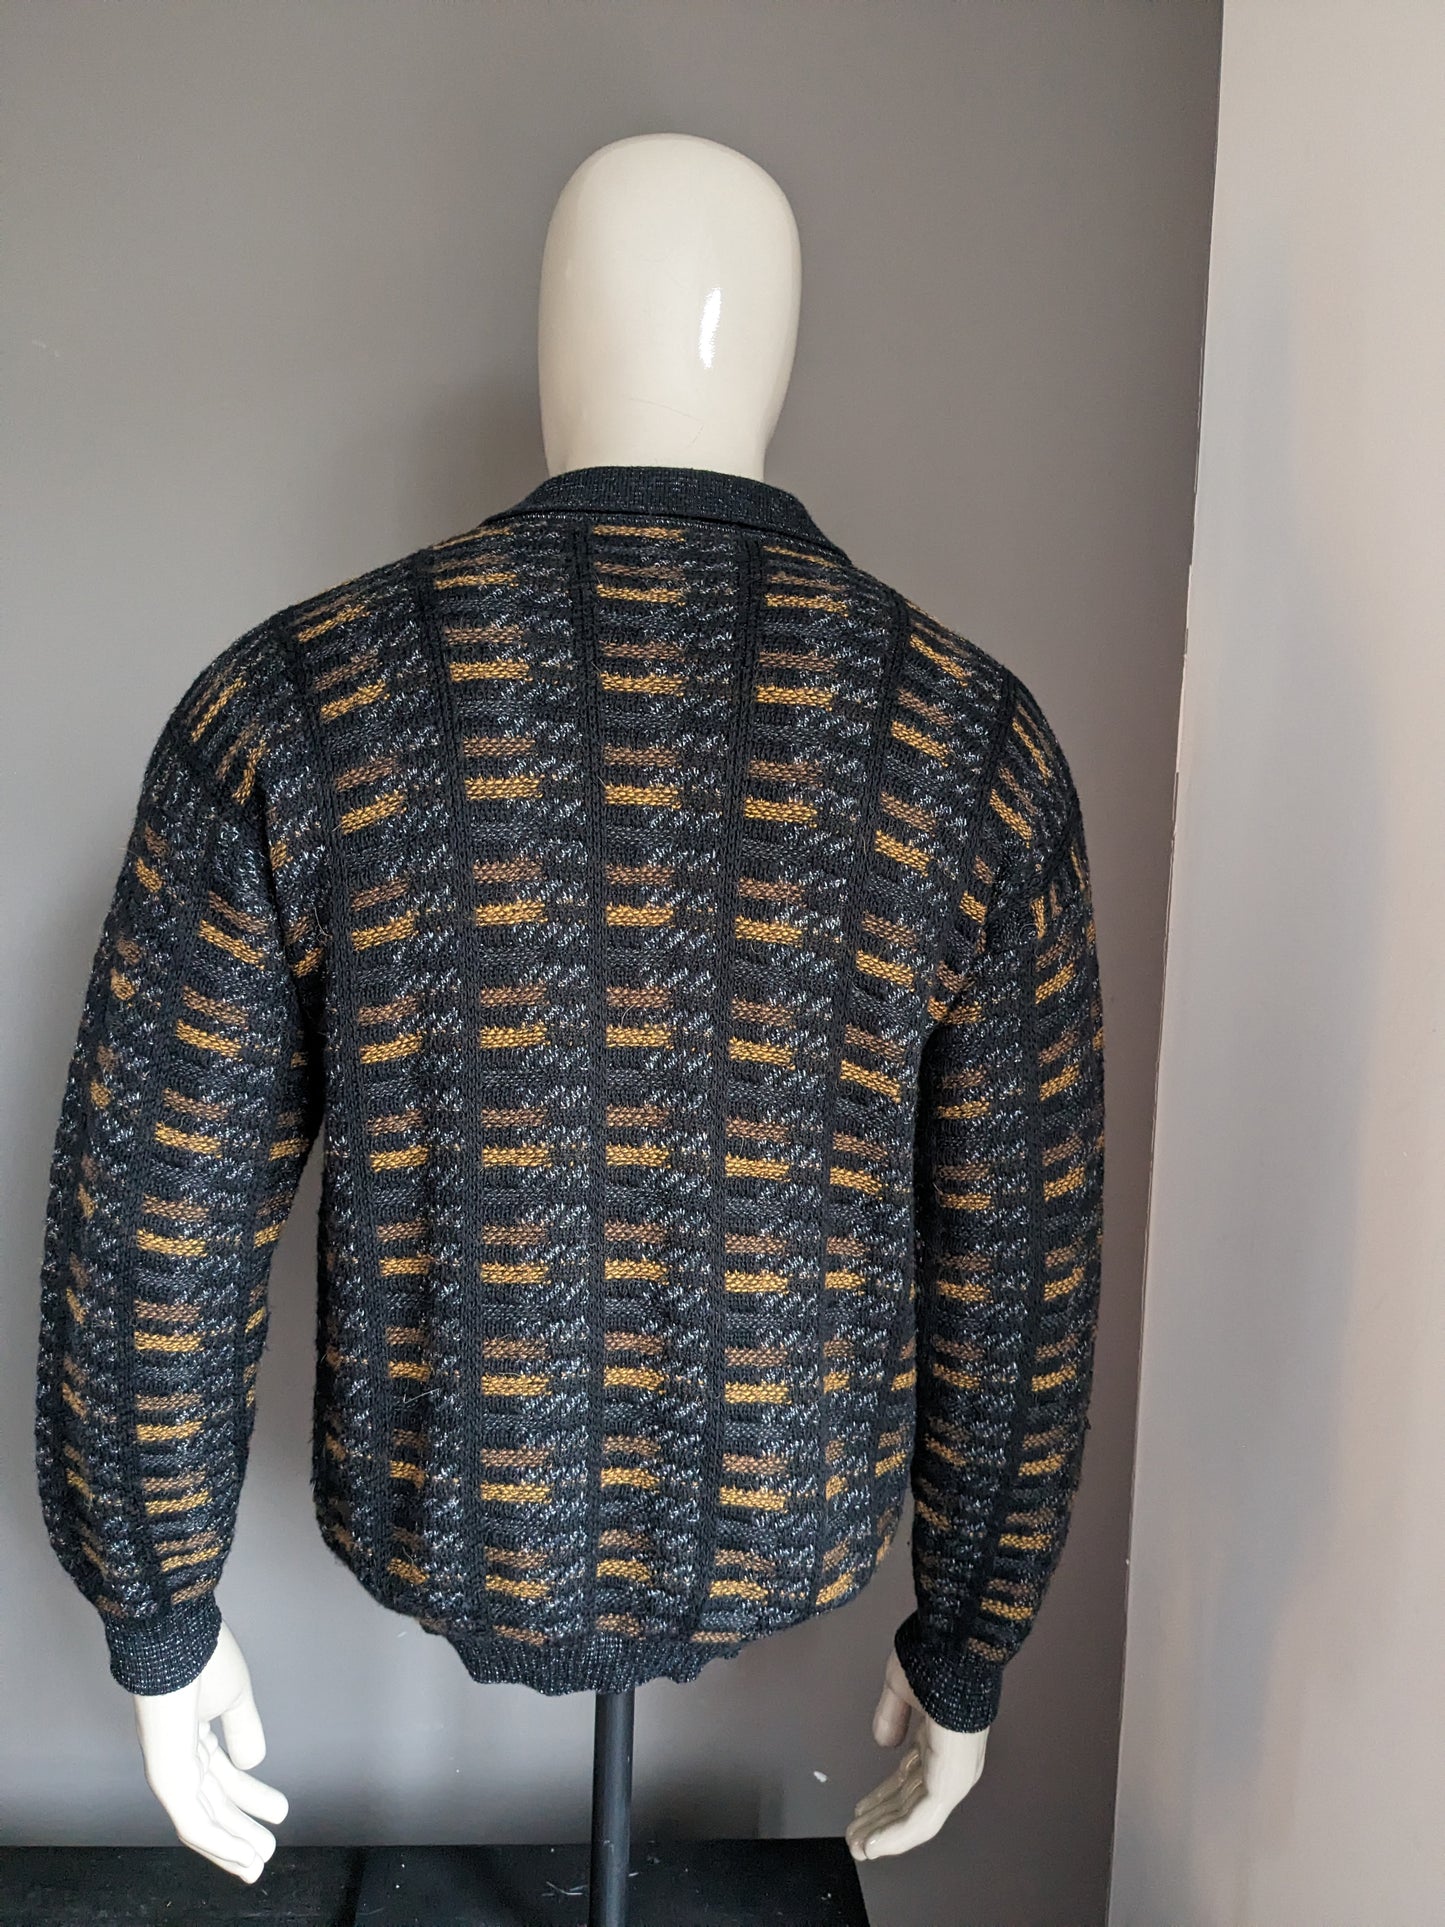 Vintage Monello wool polo sweater. Black yellow brown colored. Size L. 55% wool.